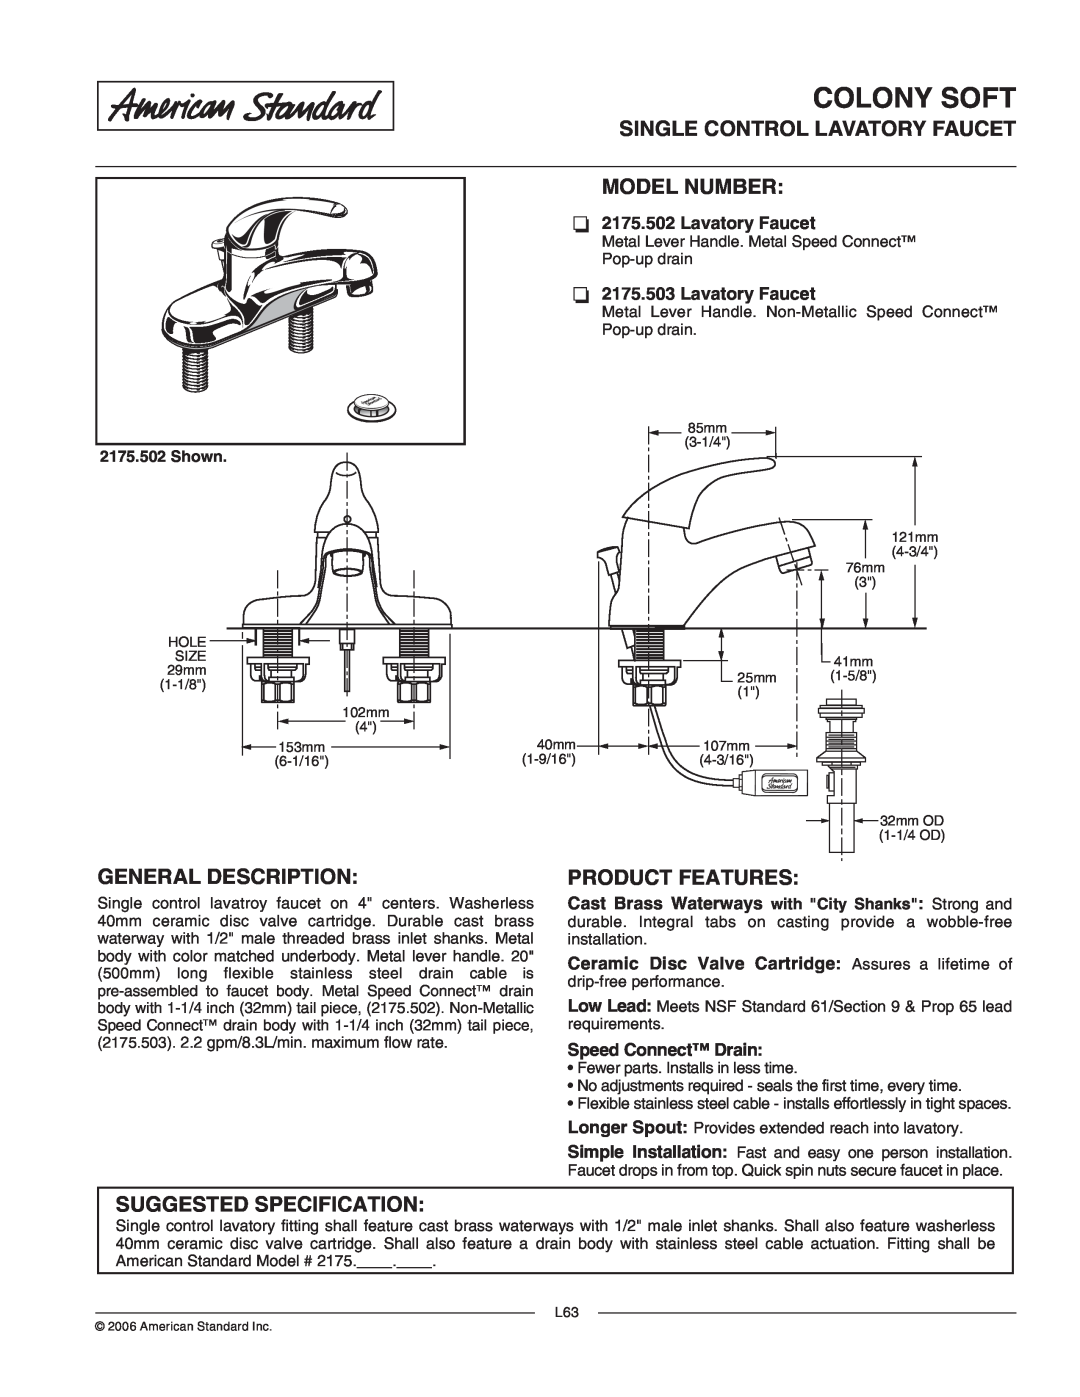 American Standard Single Control Lavatory Faucet with Speed Connect Drain installation instructions Installation, 2175.503 